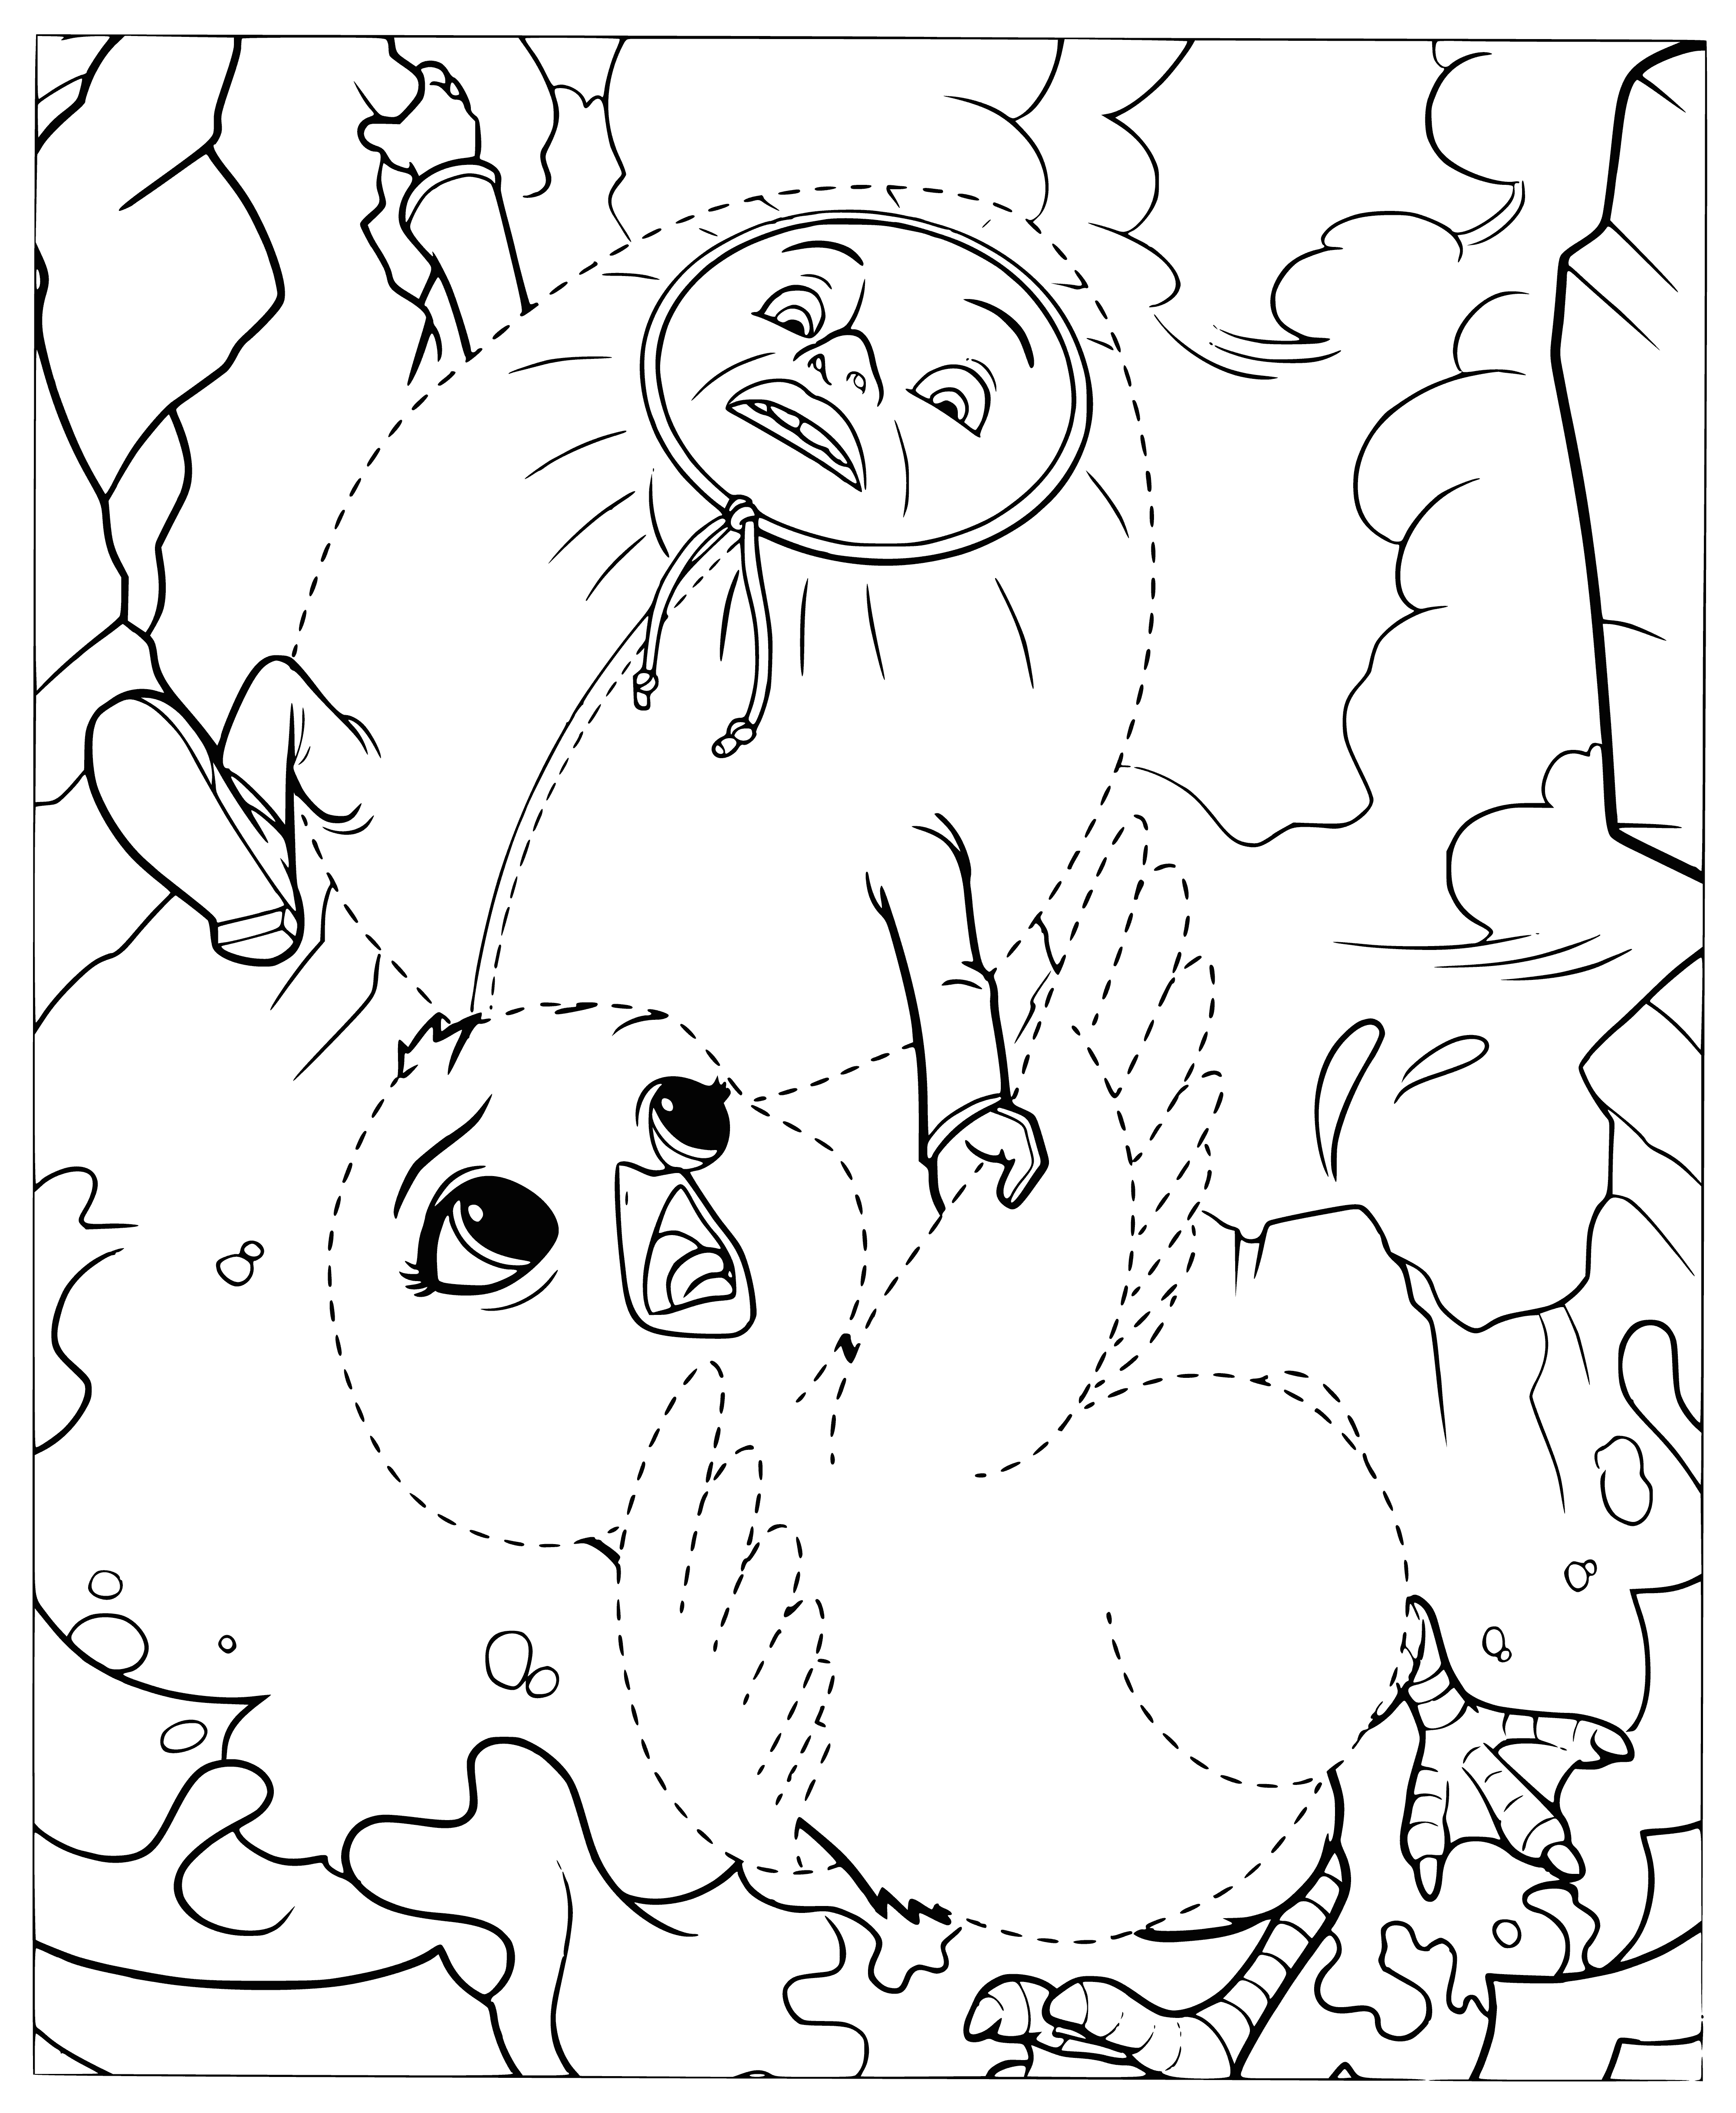 coloring page: Goose & cat in front of tree look off-page, Goose white/blue eyes, Cat brown/red scarf.